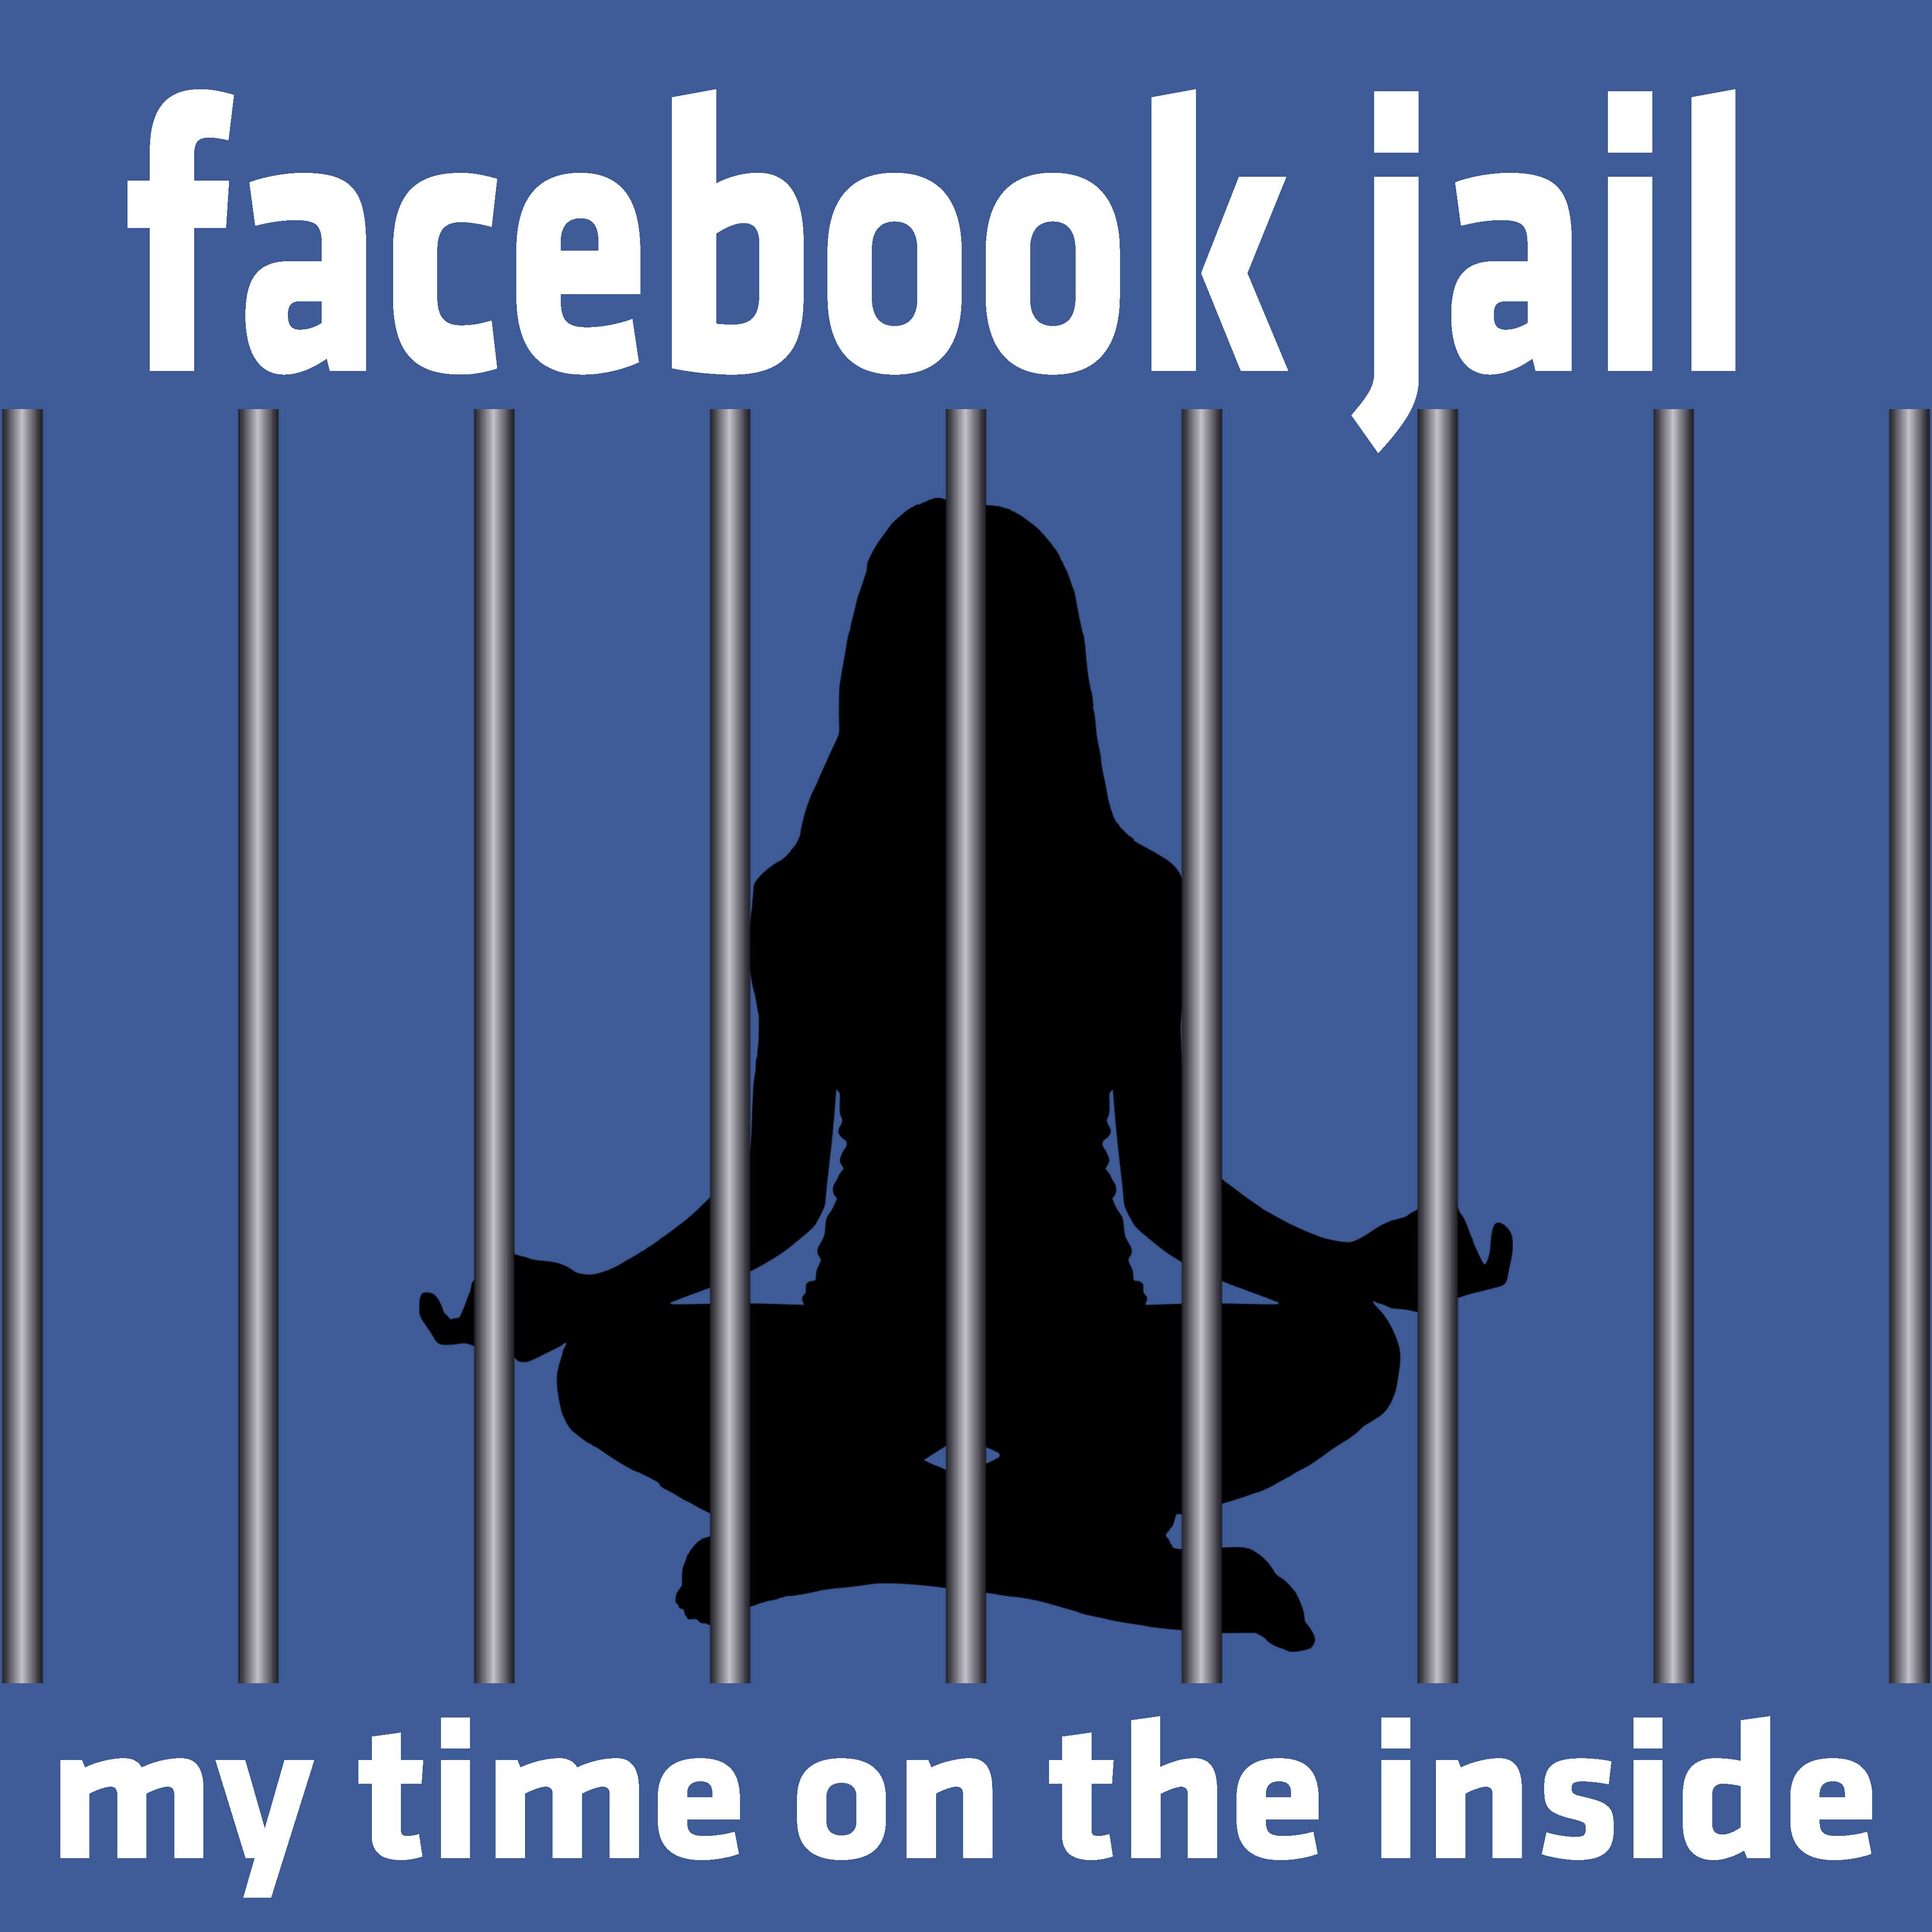 How To Stay Out of Facebook Jail - Crochet 365 Knit Too